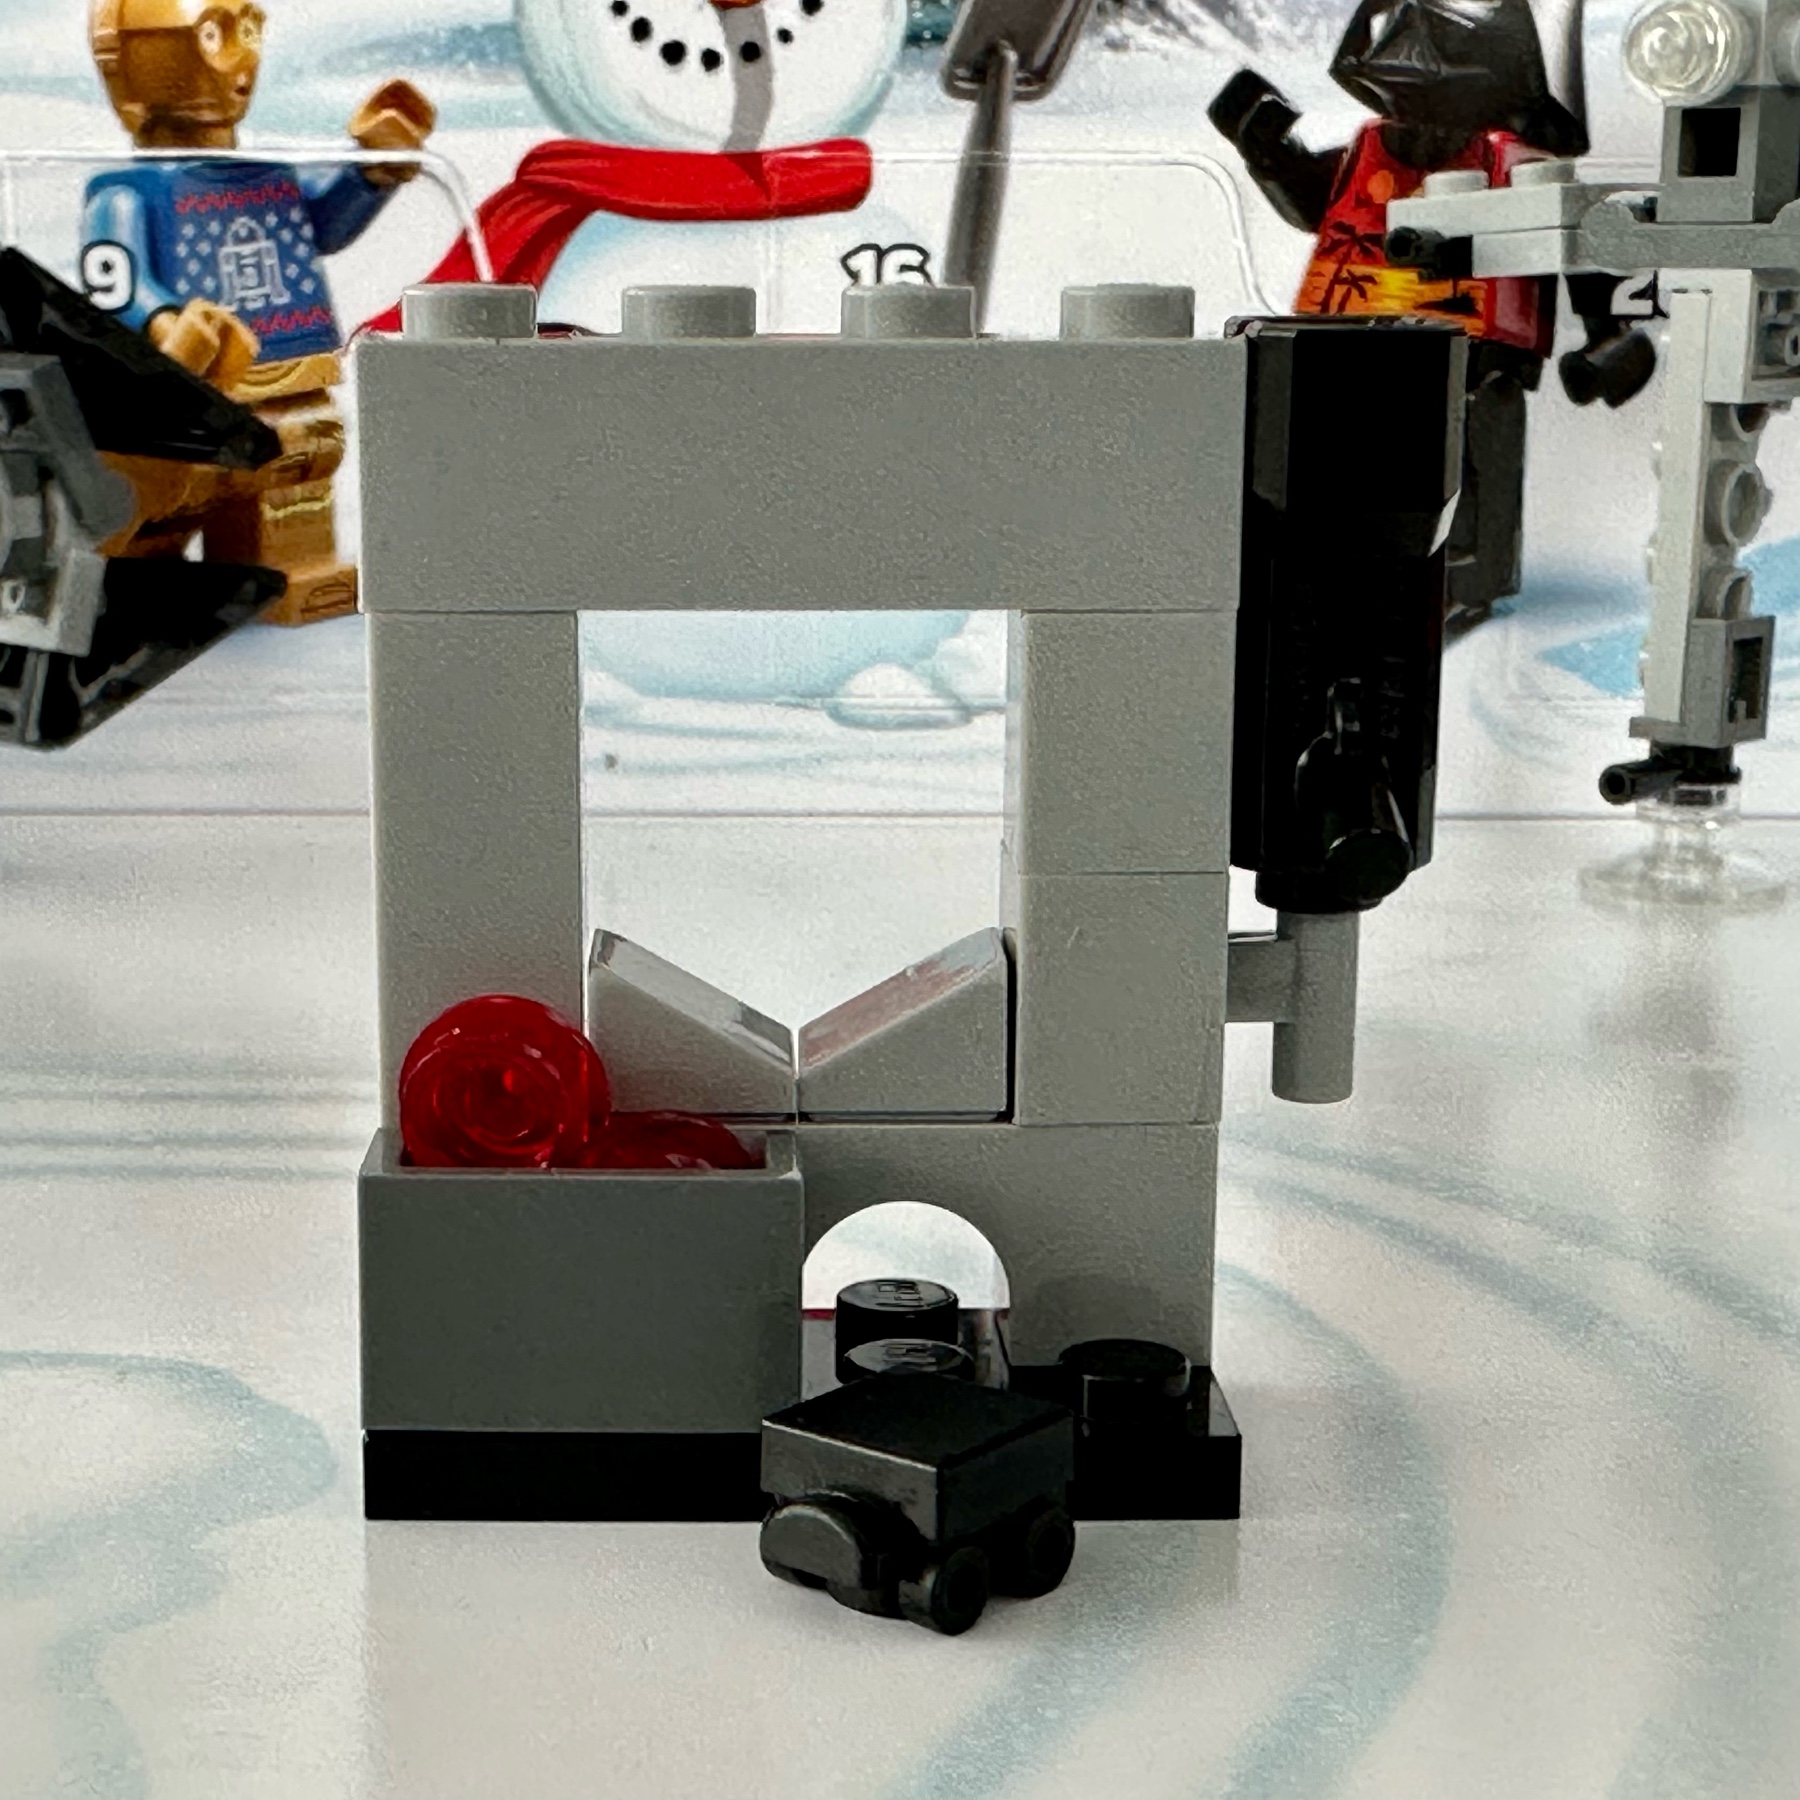 LEGO build of a small section of wall with a window and mouse hole in it. A gun hangs on the wall and a small crate of ammo sits in front. A mouse droid has rolled out of the hole.